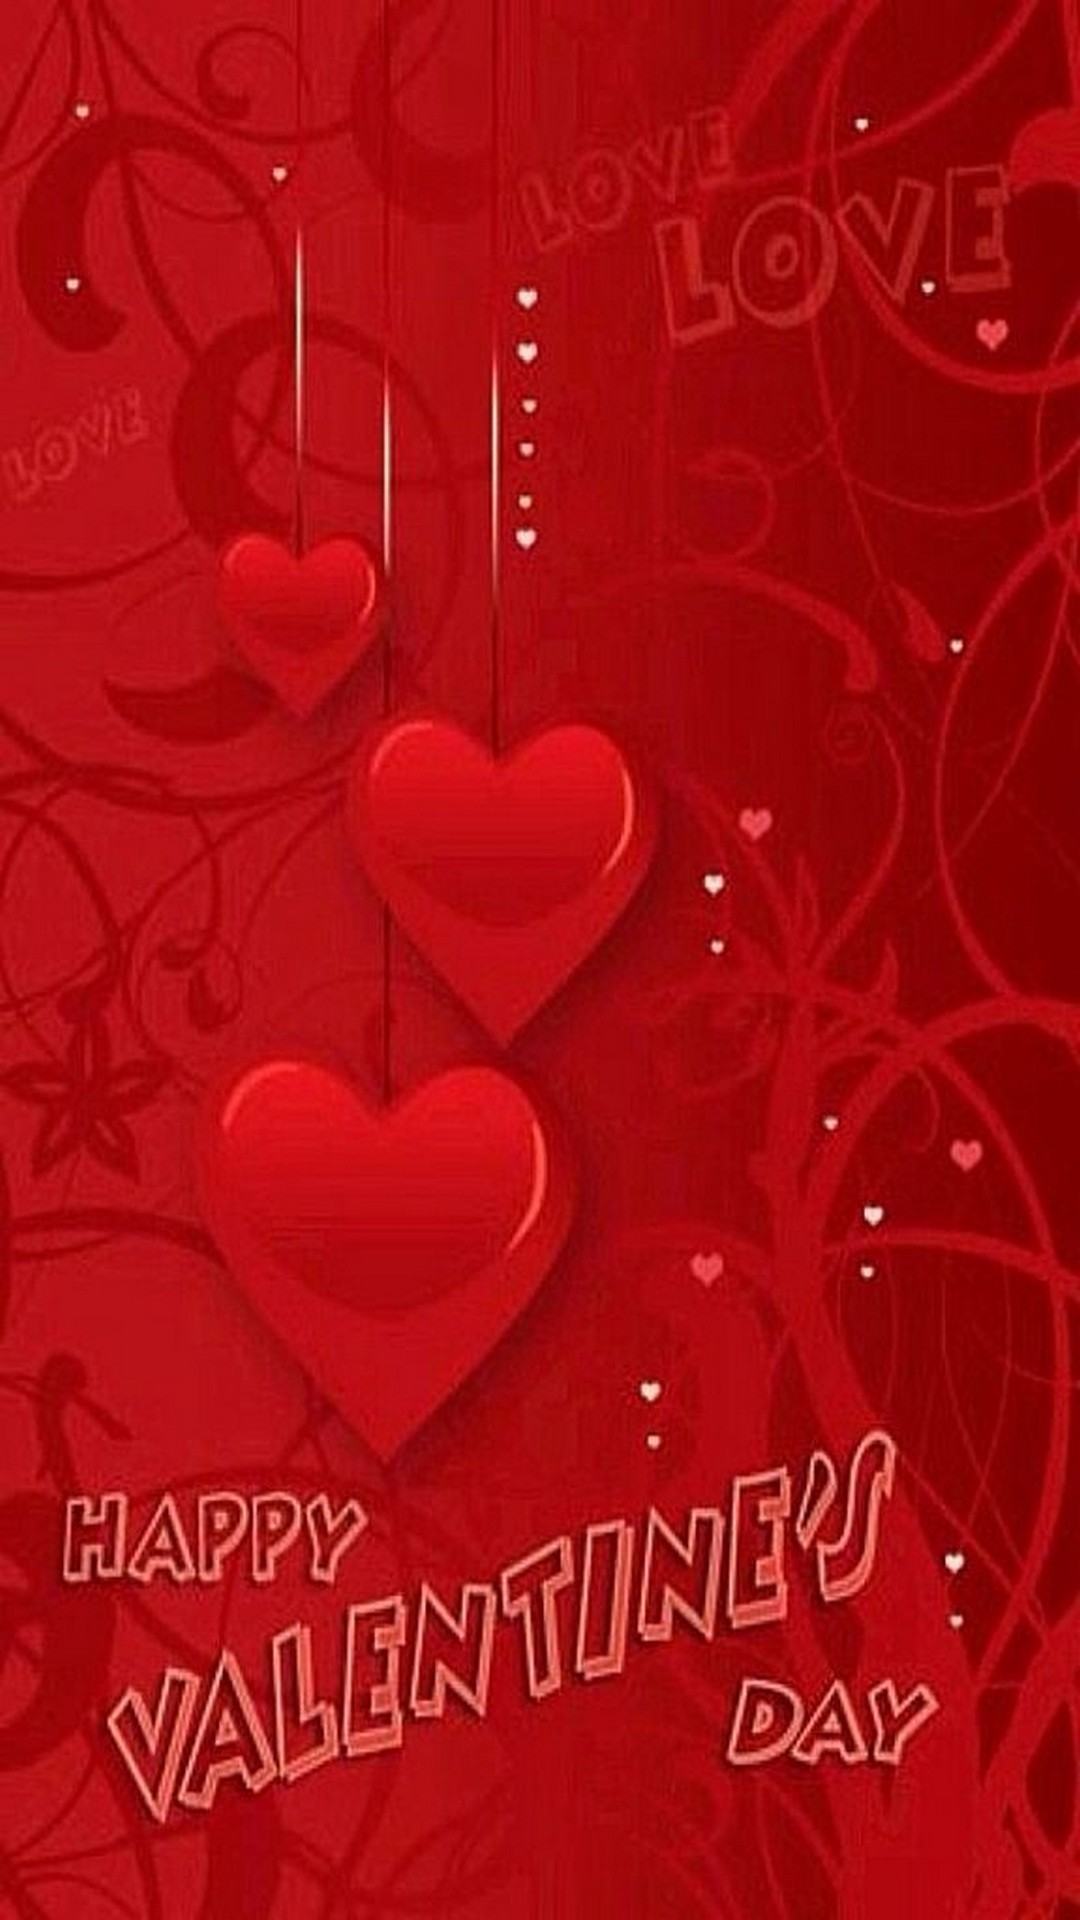 Happy Valentines Day Images For Android with HD resolution 1080x1920